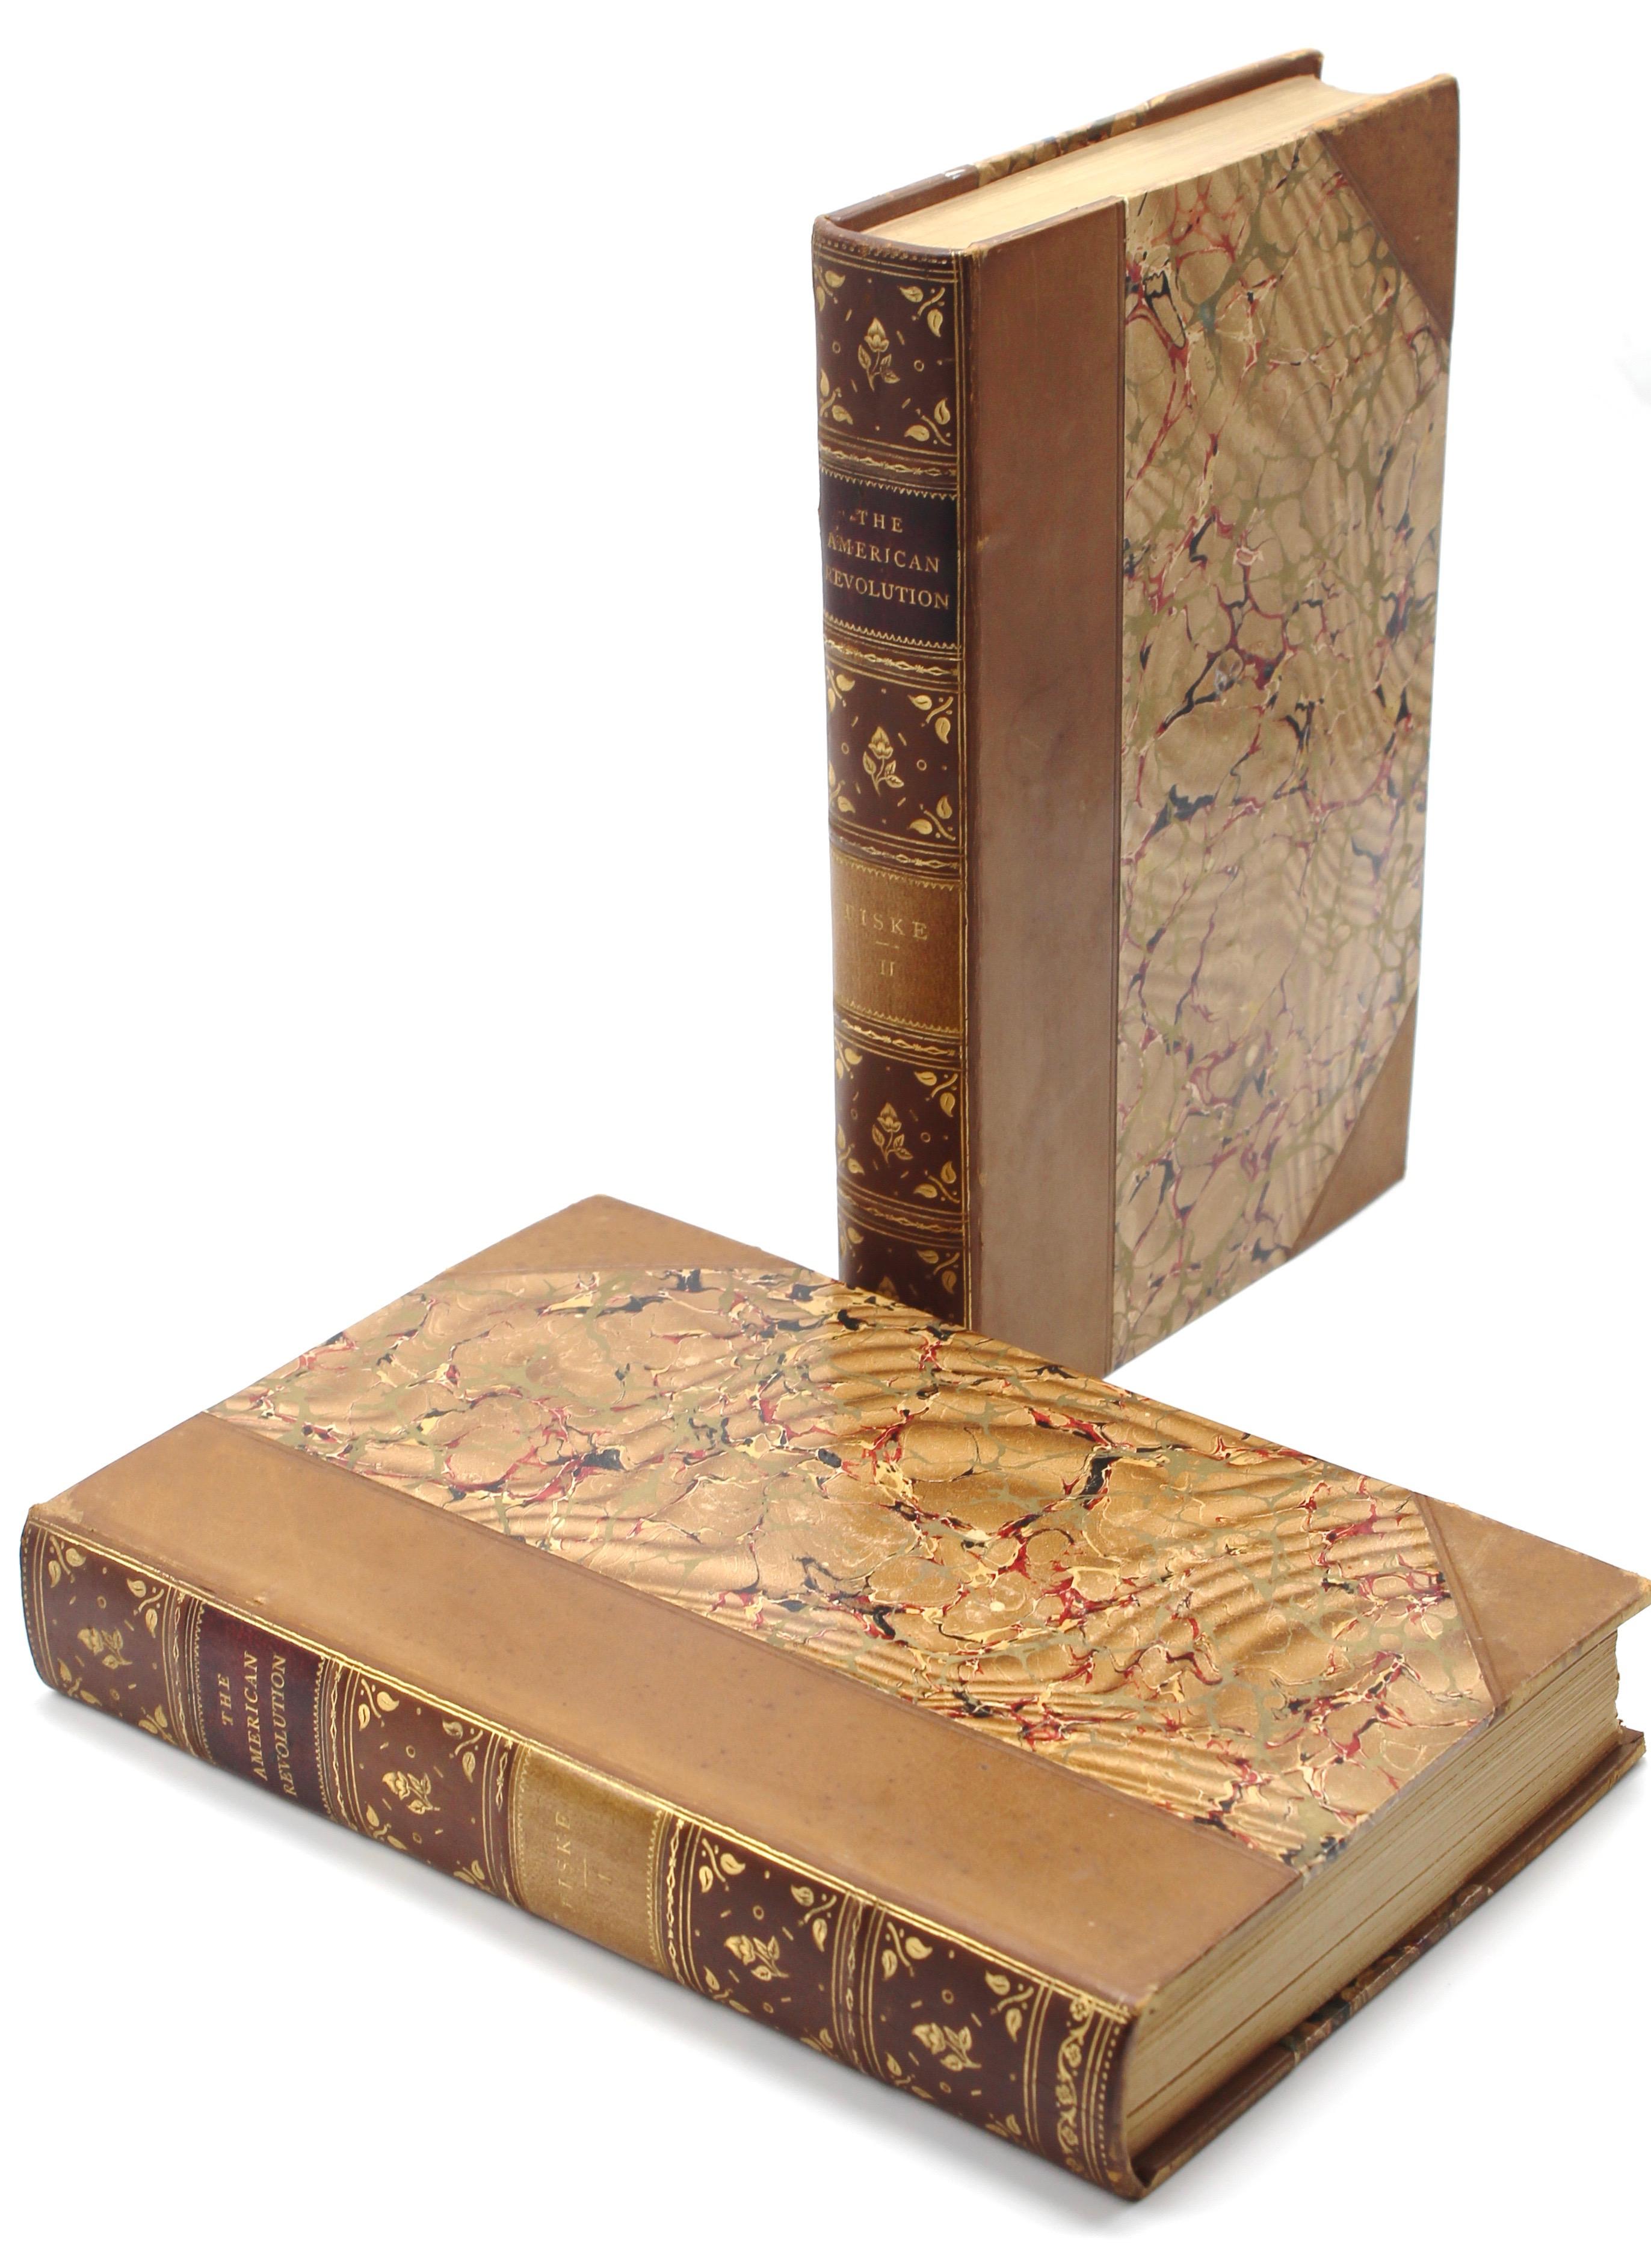 Paper The American Revolution by John Fiske, Later Printing, Two Volumes, 1901 For Sale